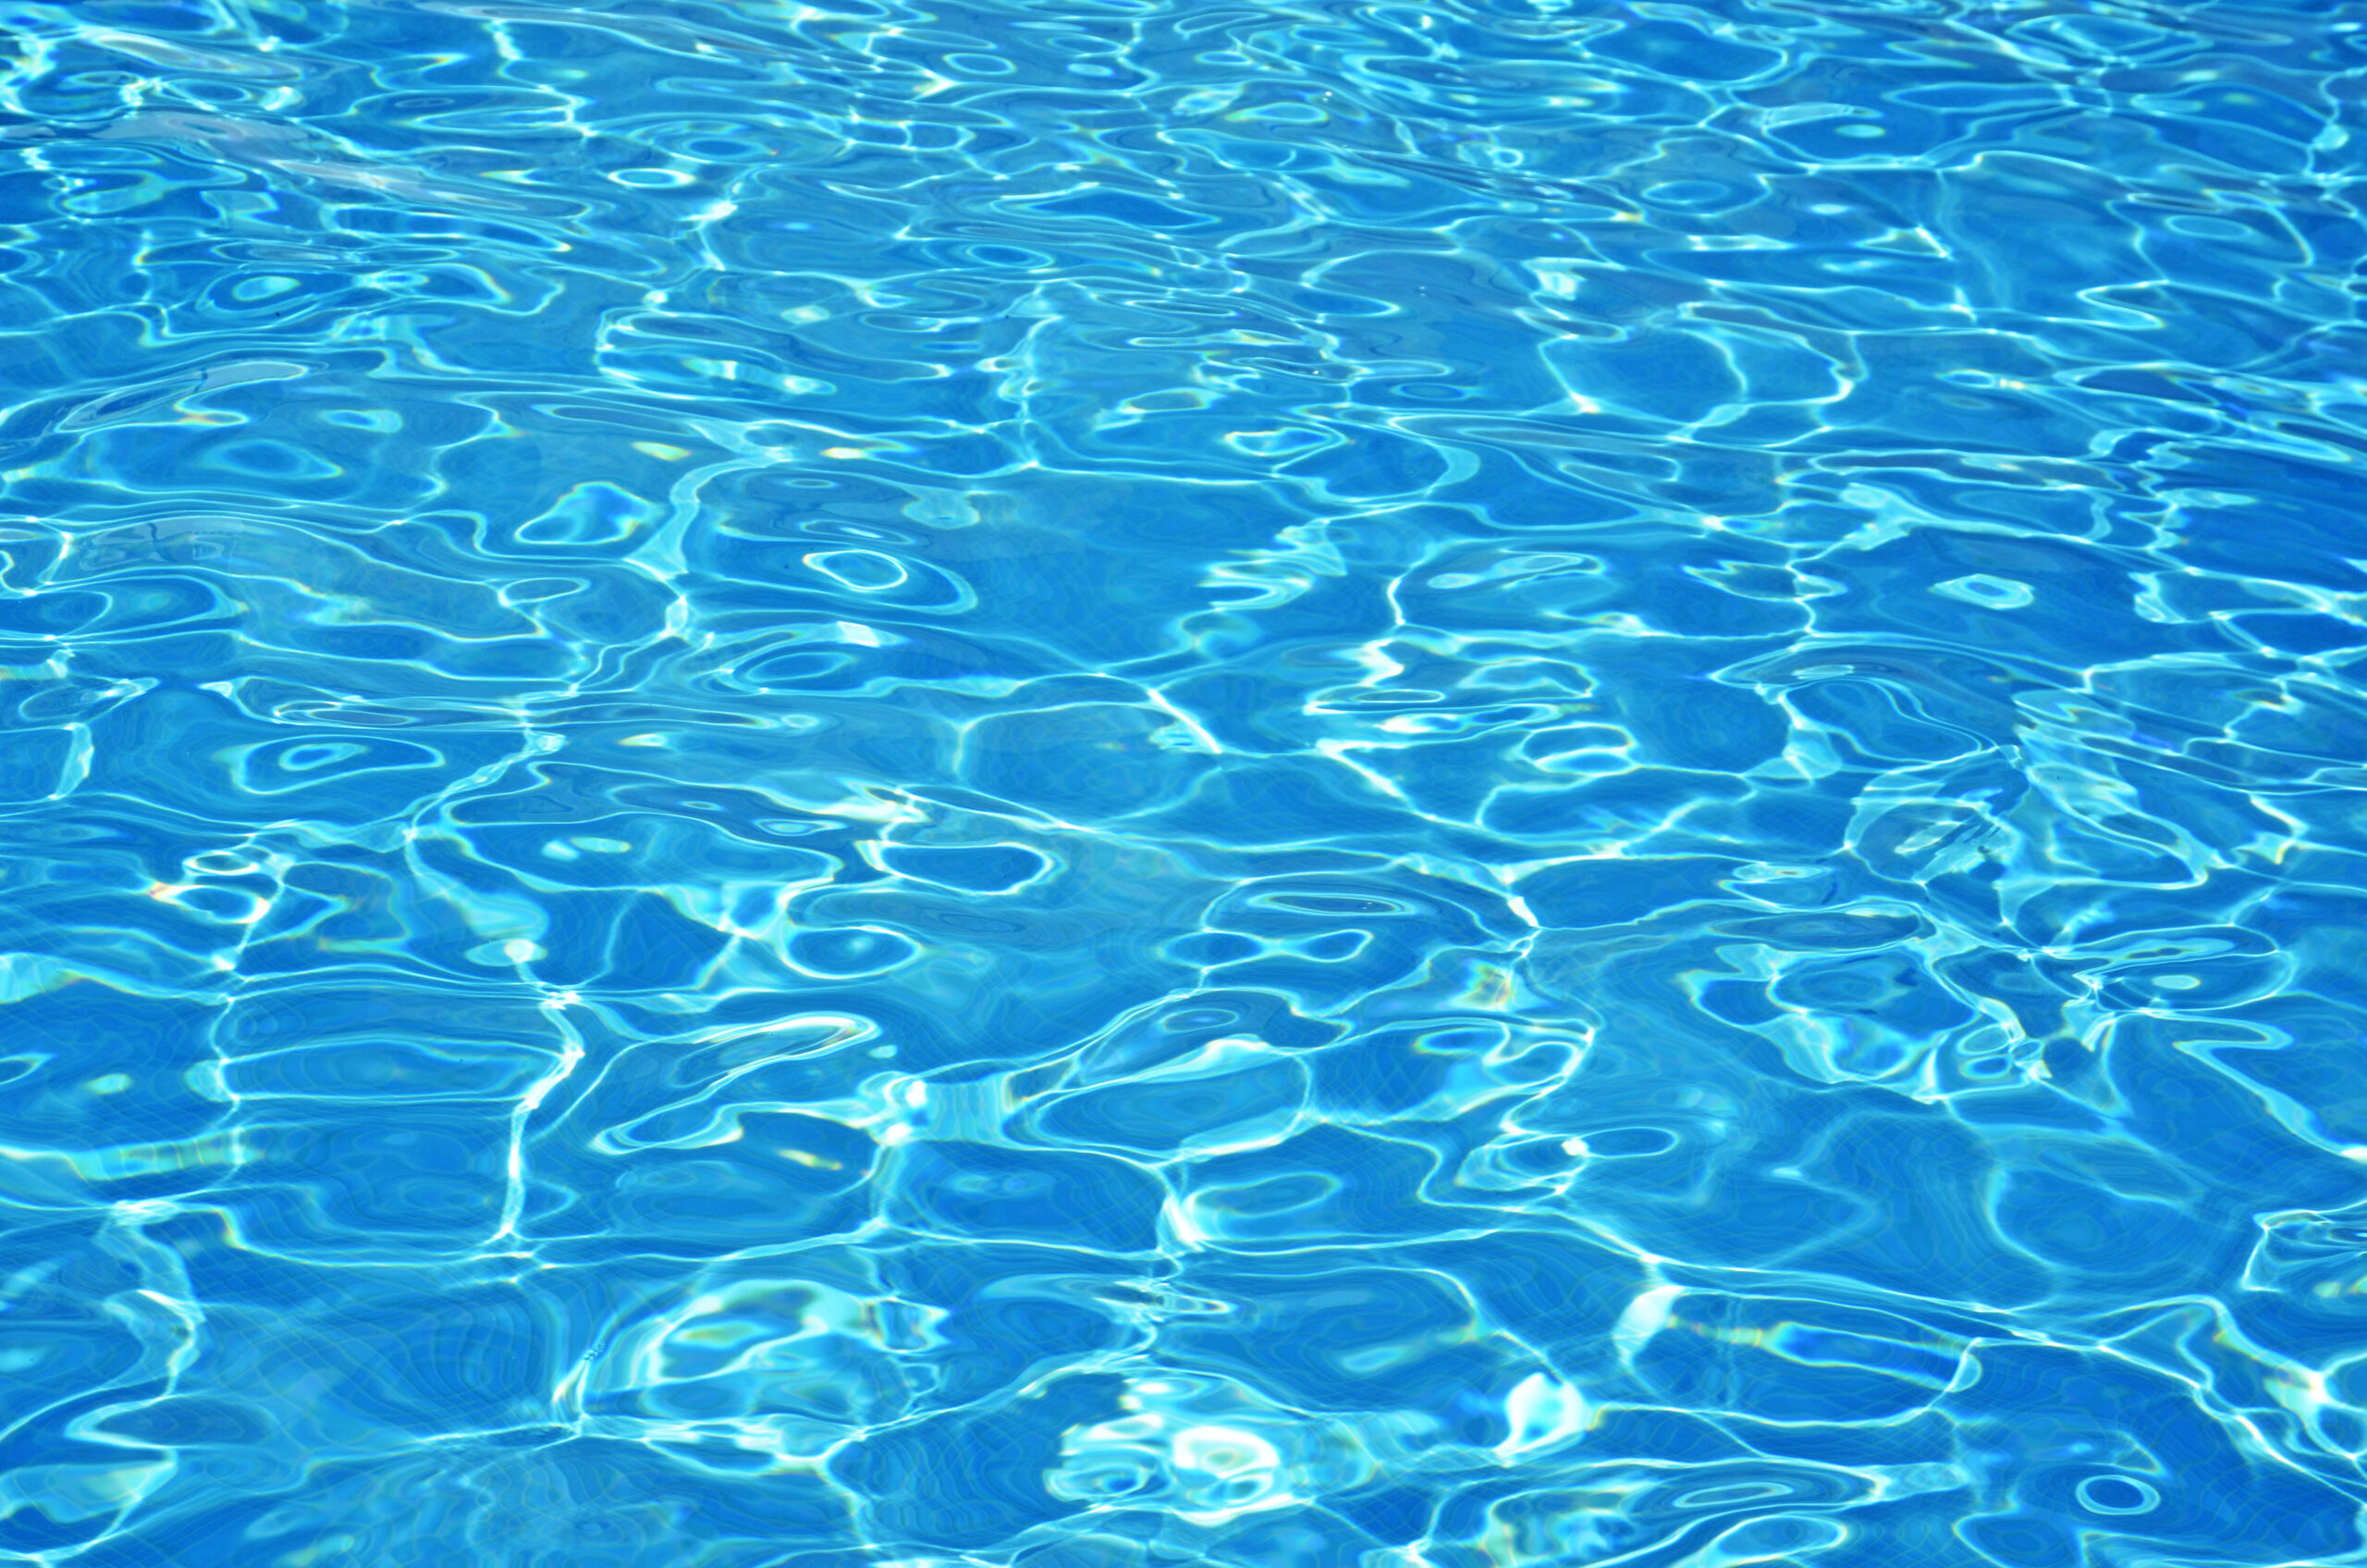 Sparkling pool water under the glistening sunlight, with rippling waves and a crystal-clear surface, inviting for a refreshing swim on a bright and sunny day.